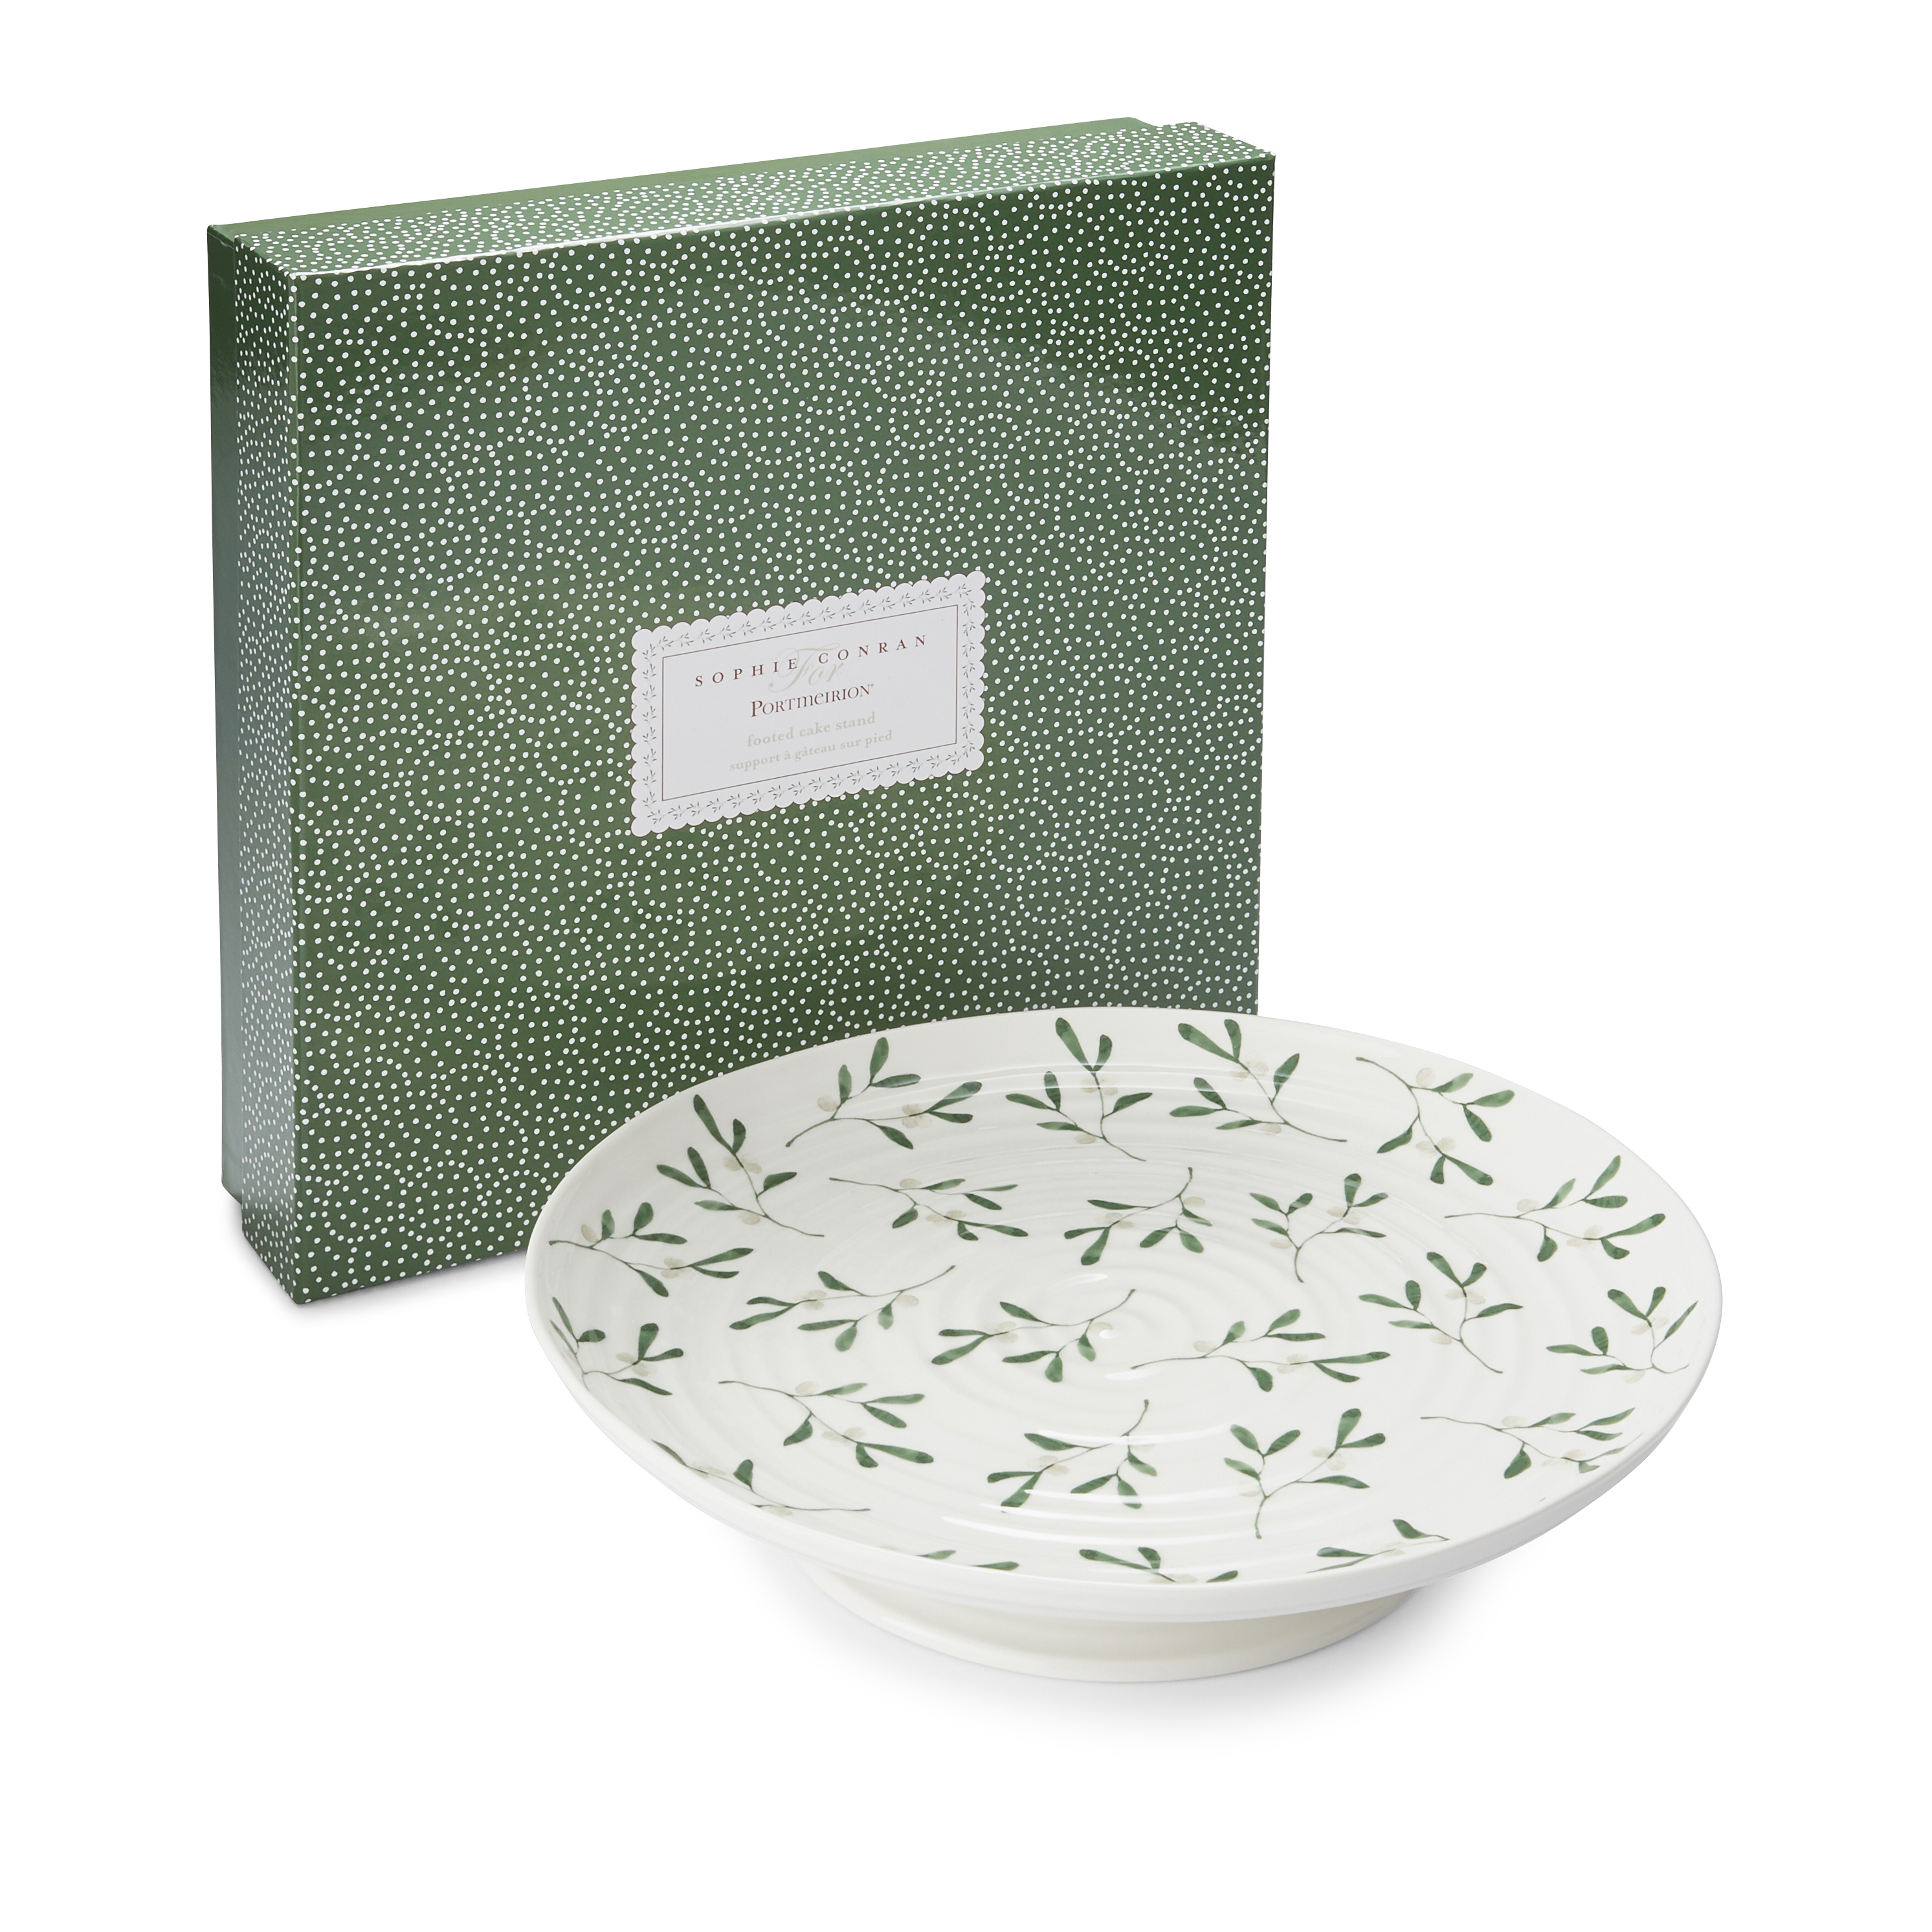 Sophie Conran Mistletoe Footed Cake Plate image number null